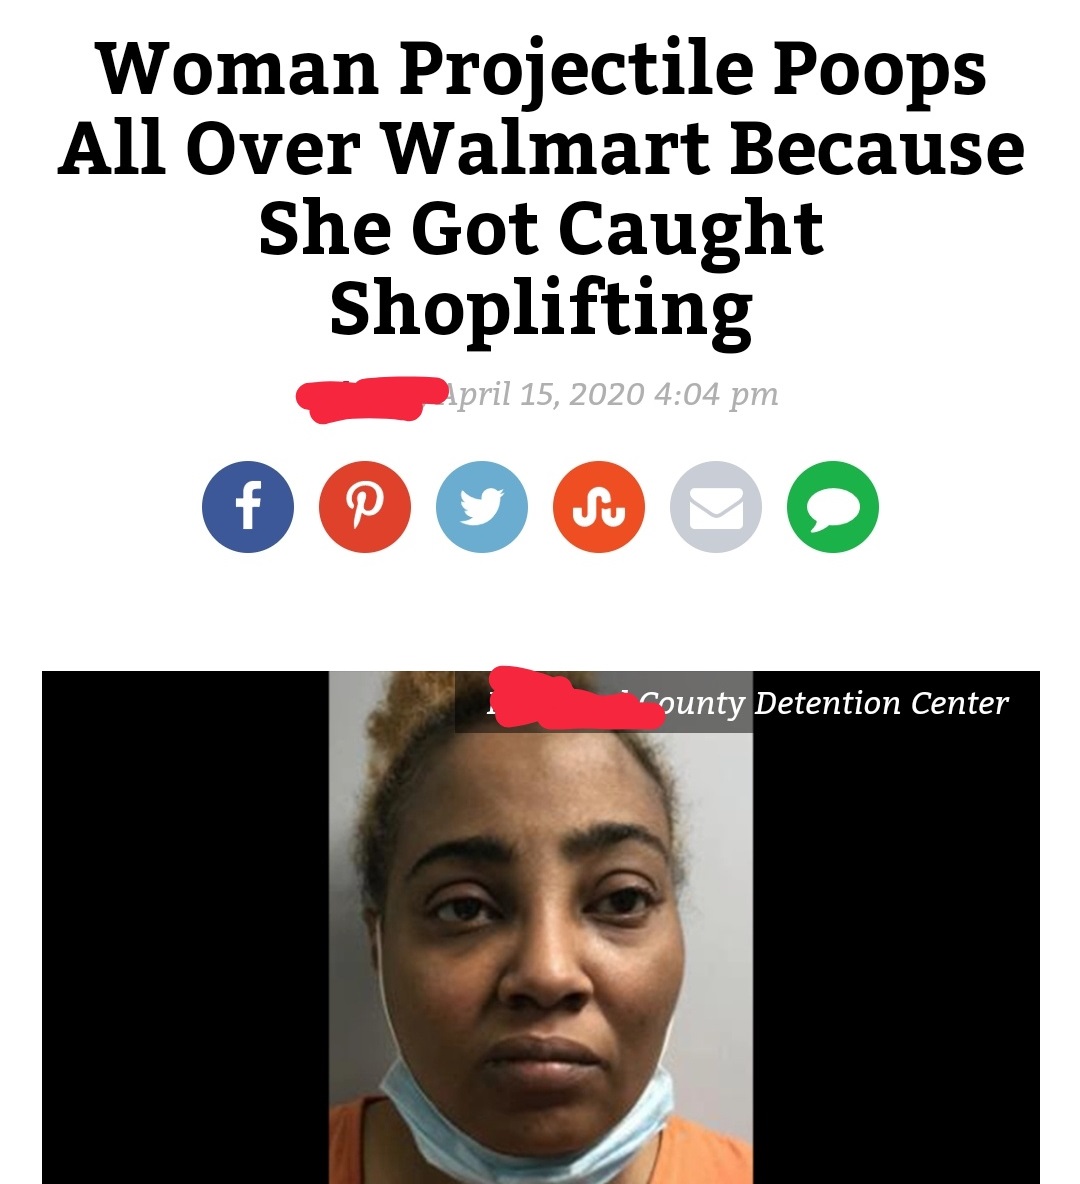 human behavior - Woman Projectile Poops All Over Walmart Because She Got Caught Shoplifting pril 15, 2020 County Detention Center